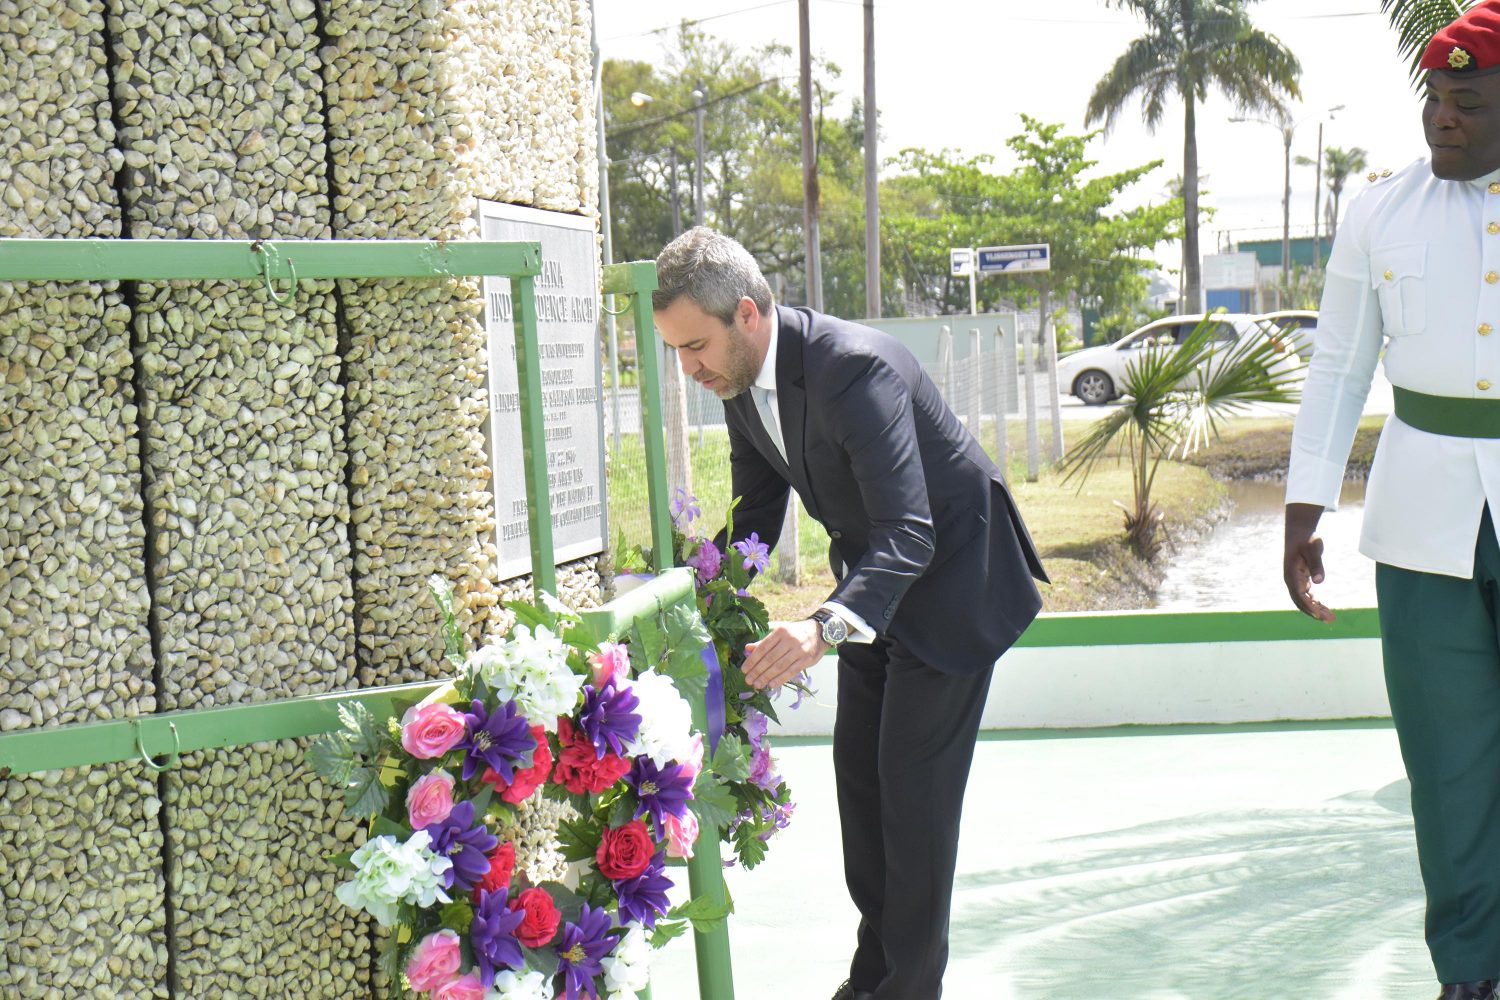 Non-Resident High Commissioner of the Republic of Cyprus to Guyana, Haralambos Kafkarides laying a wreath at the Independence Arch on Brickdam. (Ministry of the Presidency photo)